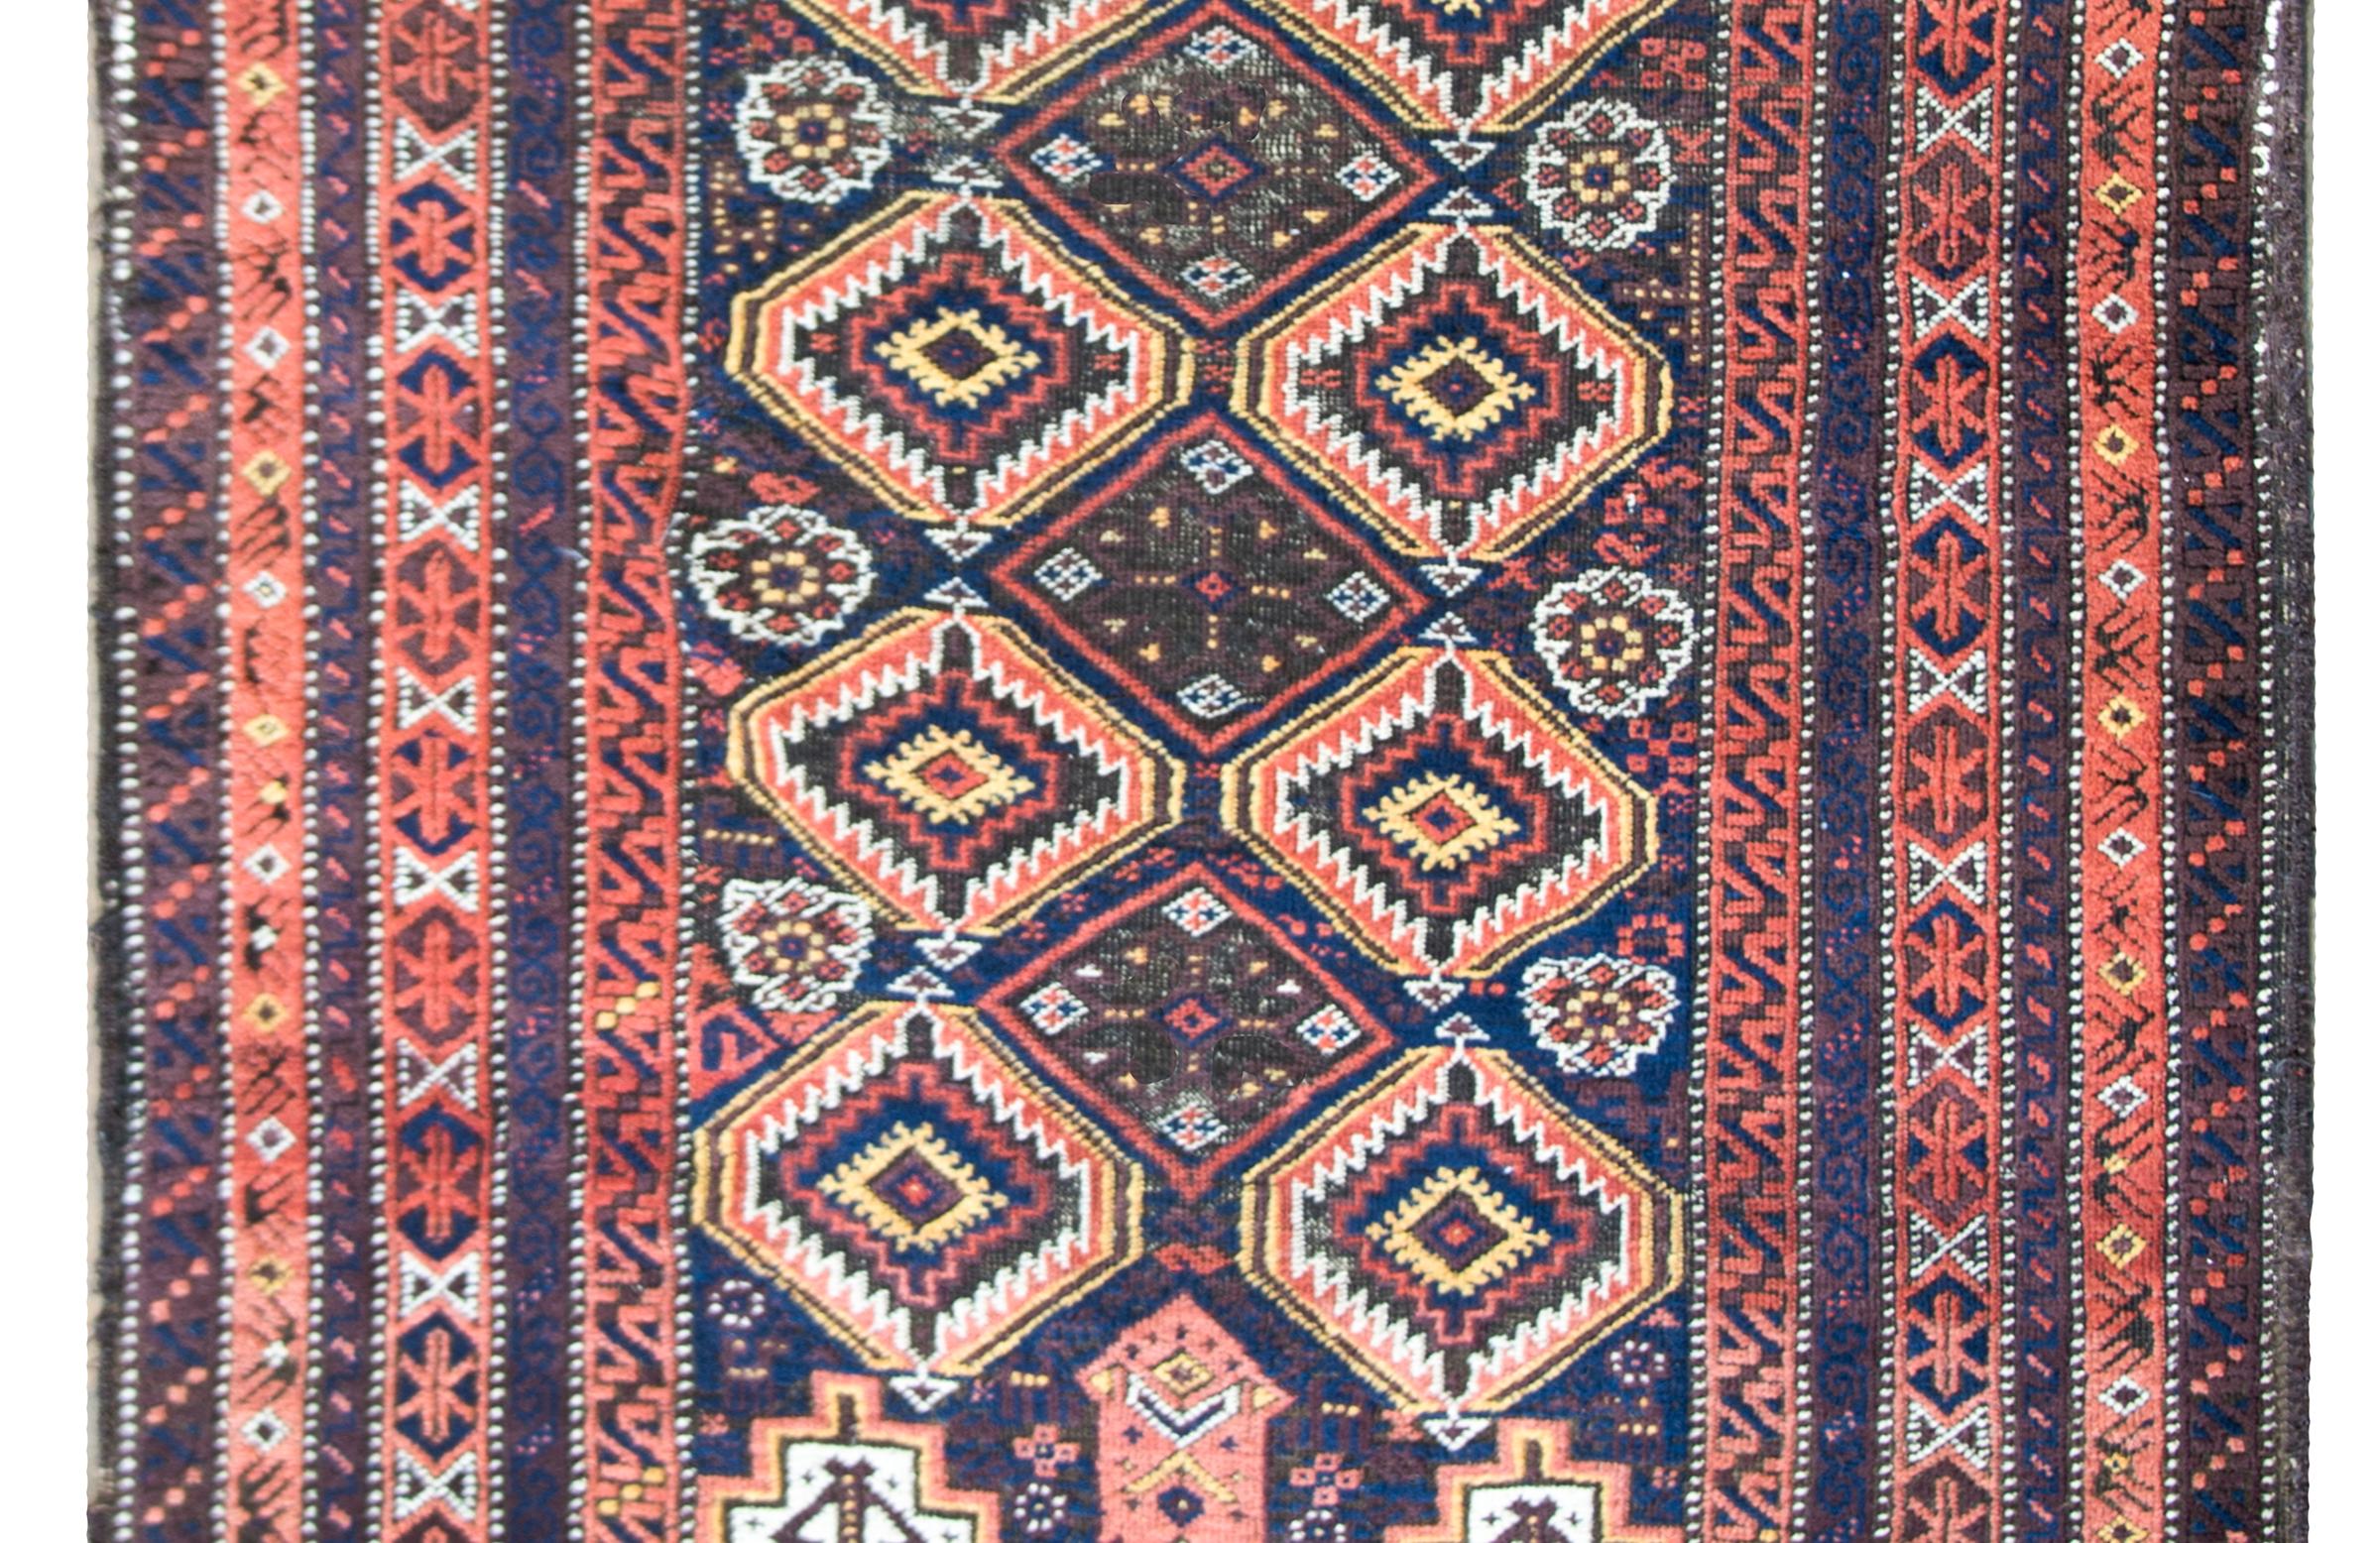 A stunning early 20th century Persian Baluch rug with an all-over diamond pattern woven with petite stylized flowers, all woven in orange, gold, white, and indigo wool, set against a brown background, and surrounded by a complex border of multiple